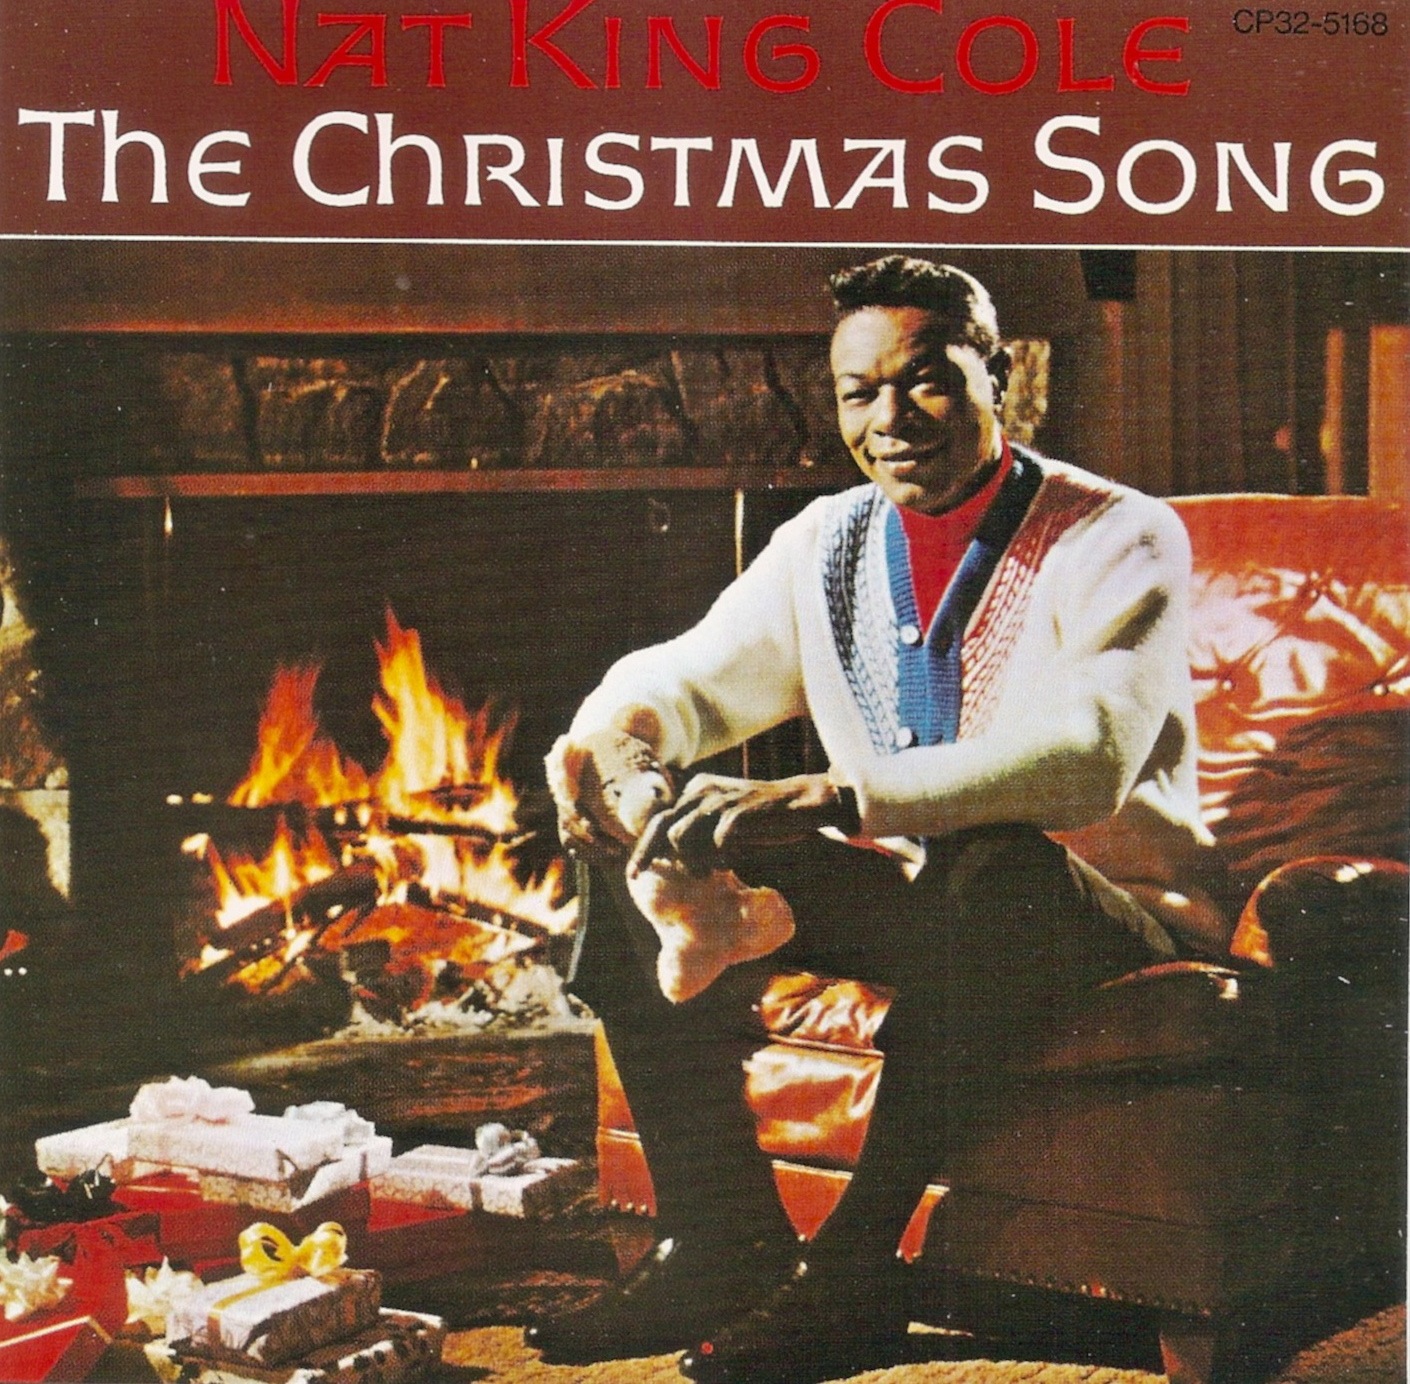 The First Pressing CD Collection: Nat King Cole - The Christmas Song